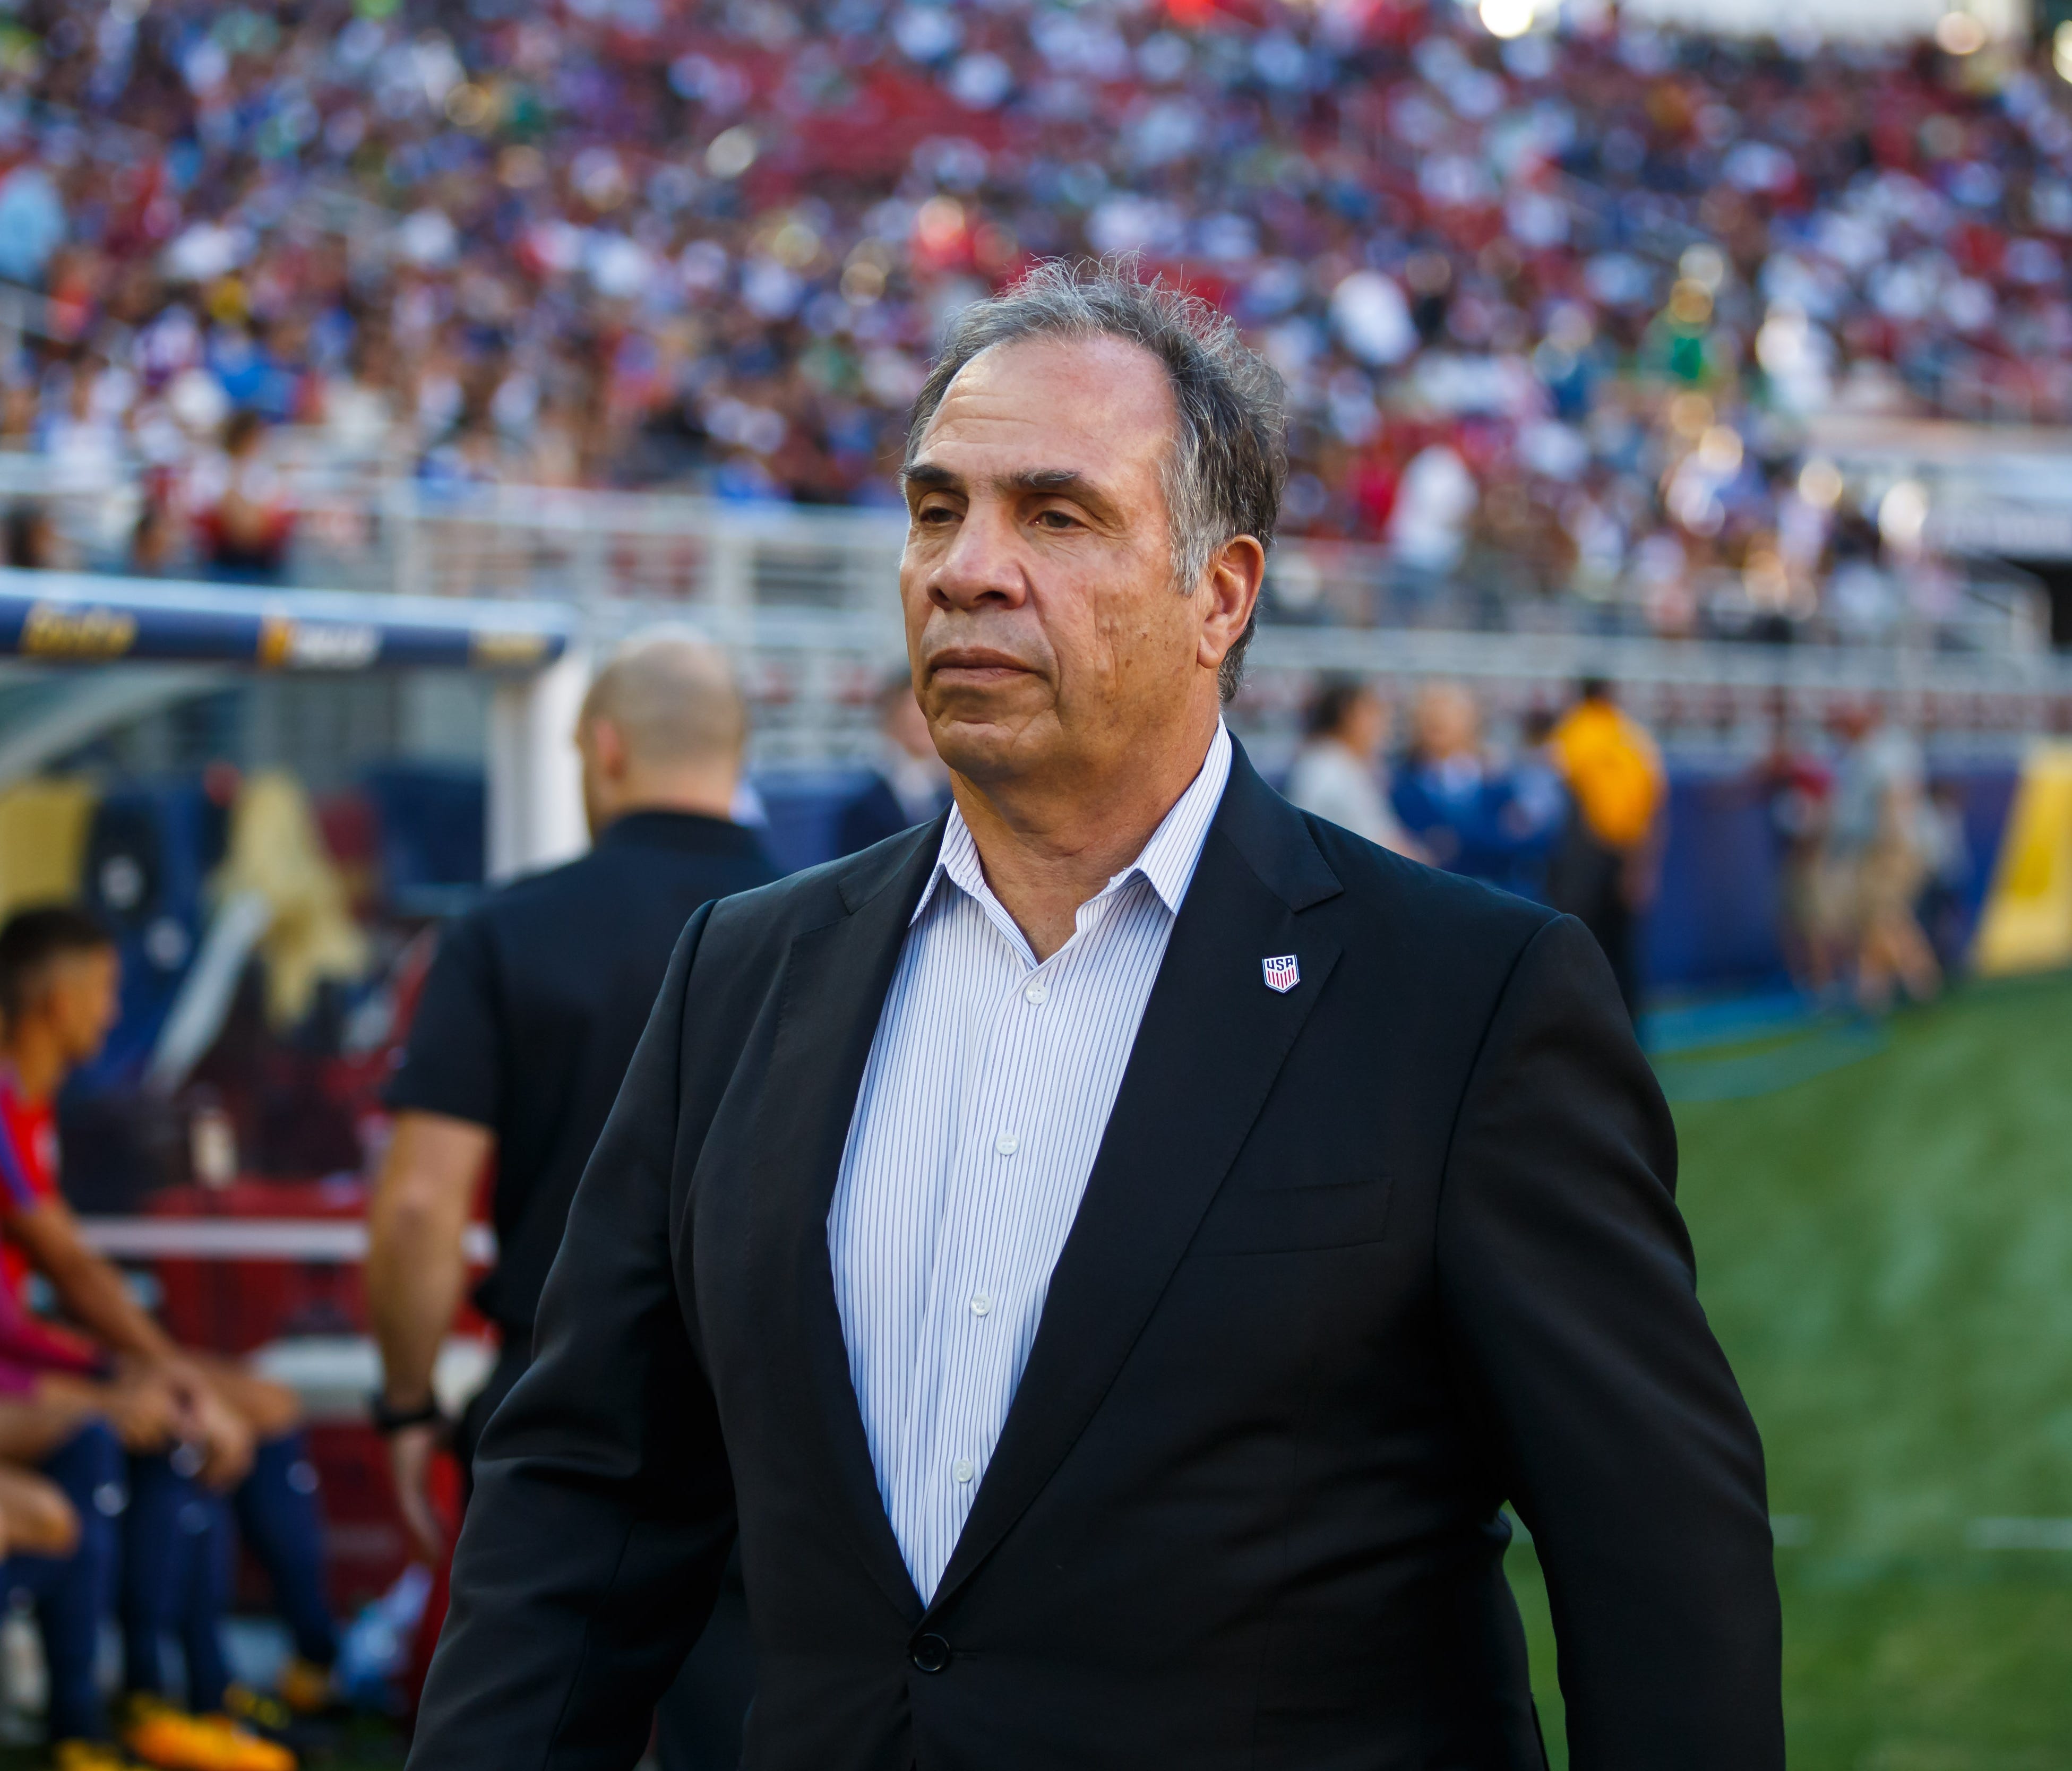 United States head coach Bruce Arena against Jamaica during the CONCACAF Gold Cup final at Levi's Stadium.